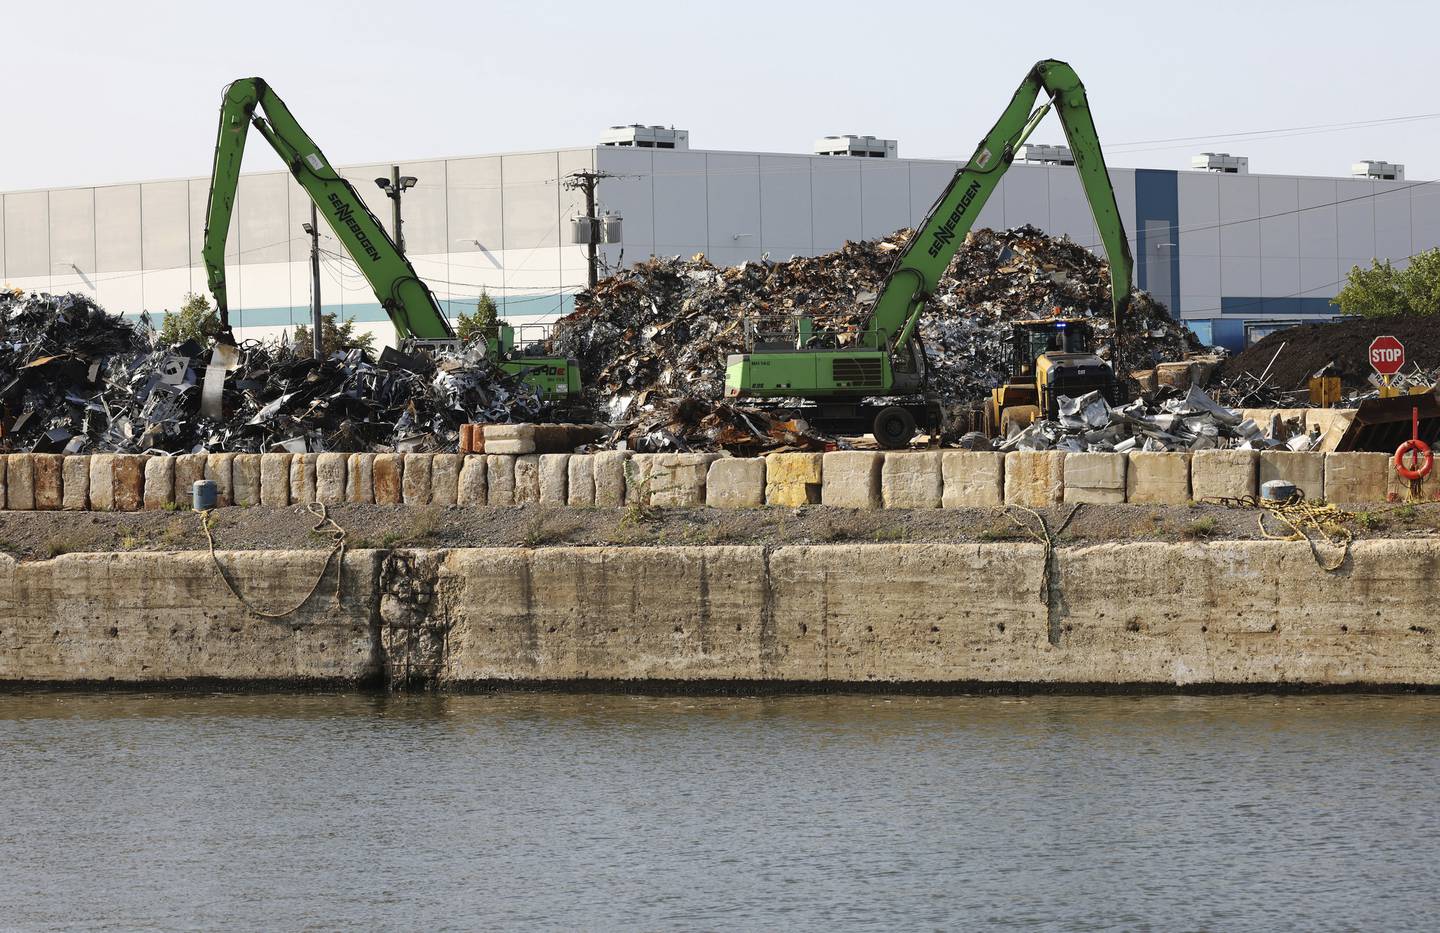 Mounds of scrap metal are moved at the Sims Metal recycling company, across the South Branch of the Chicago River from the Canalport Riverwalk on Sept. 16, 2022.